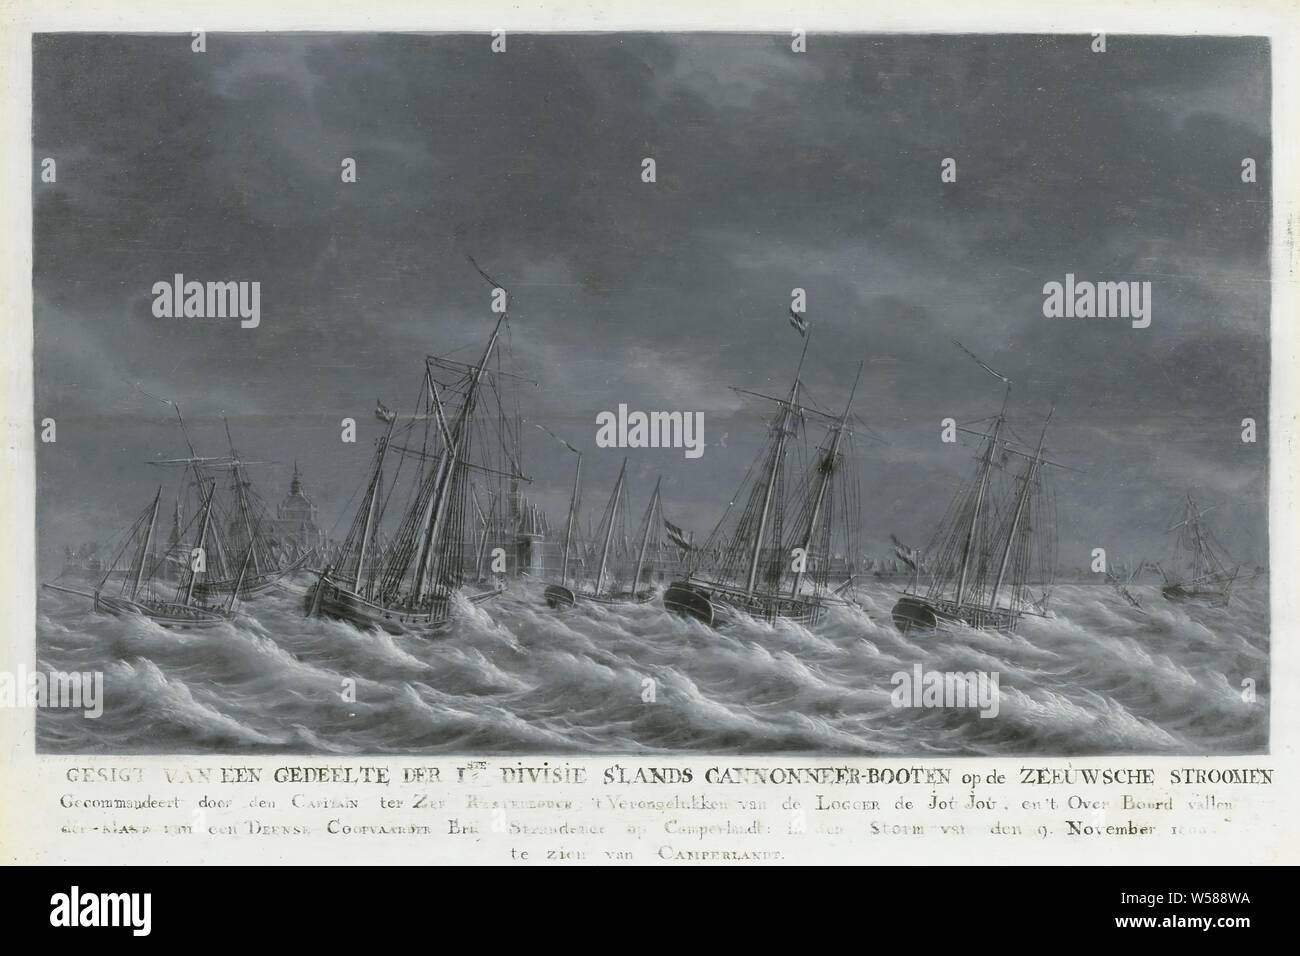 The Batavian Fleet off Veere, 1800, Seascape with the Batavian fleet on rough seas in front of Veere, on November 9, 1800. Under the show a caption: Gesigt of a Section of the 1st Division of the Netherlands Cannoneer boats on the Zeeland currents, commanded by the Capitain ter Zee Resterbooch, The accident of the Logger de Jou Jou, and the Overboard fall of the Mast of a Danish Coopvaarder Brik stranded on Camperlandt. in the Storm of the 9. November 1800, seen from Camperlandt, storm at sea, Veere, Batavian Marine, Engel Hoogerheyden, Middelburg, 1800 - 1809, panel, oil paint (paint), h 31 Stock Photo